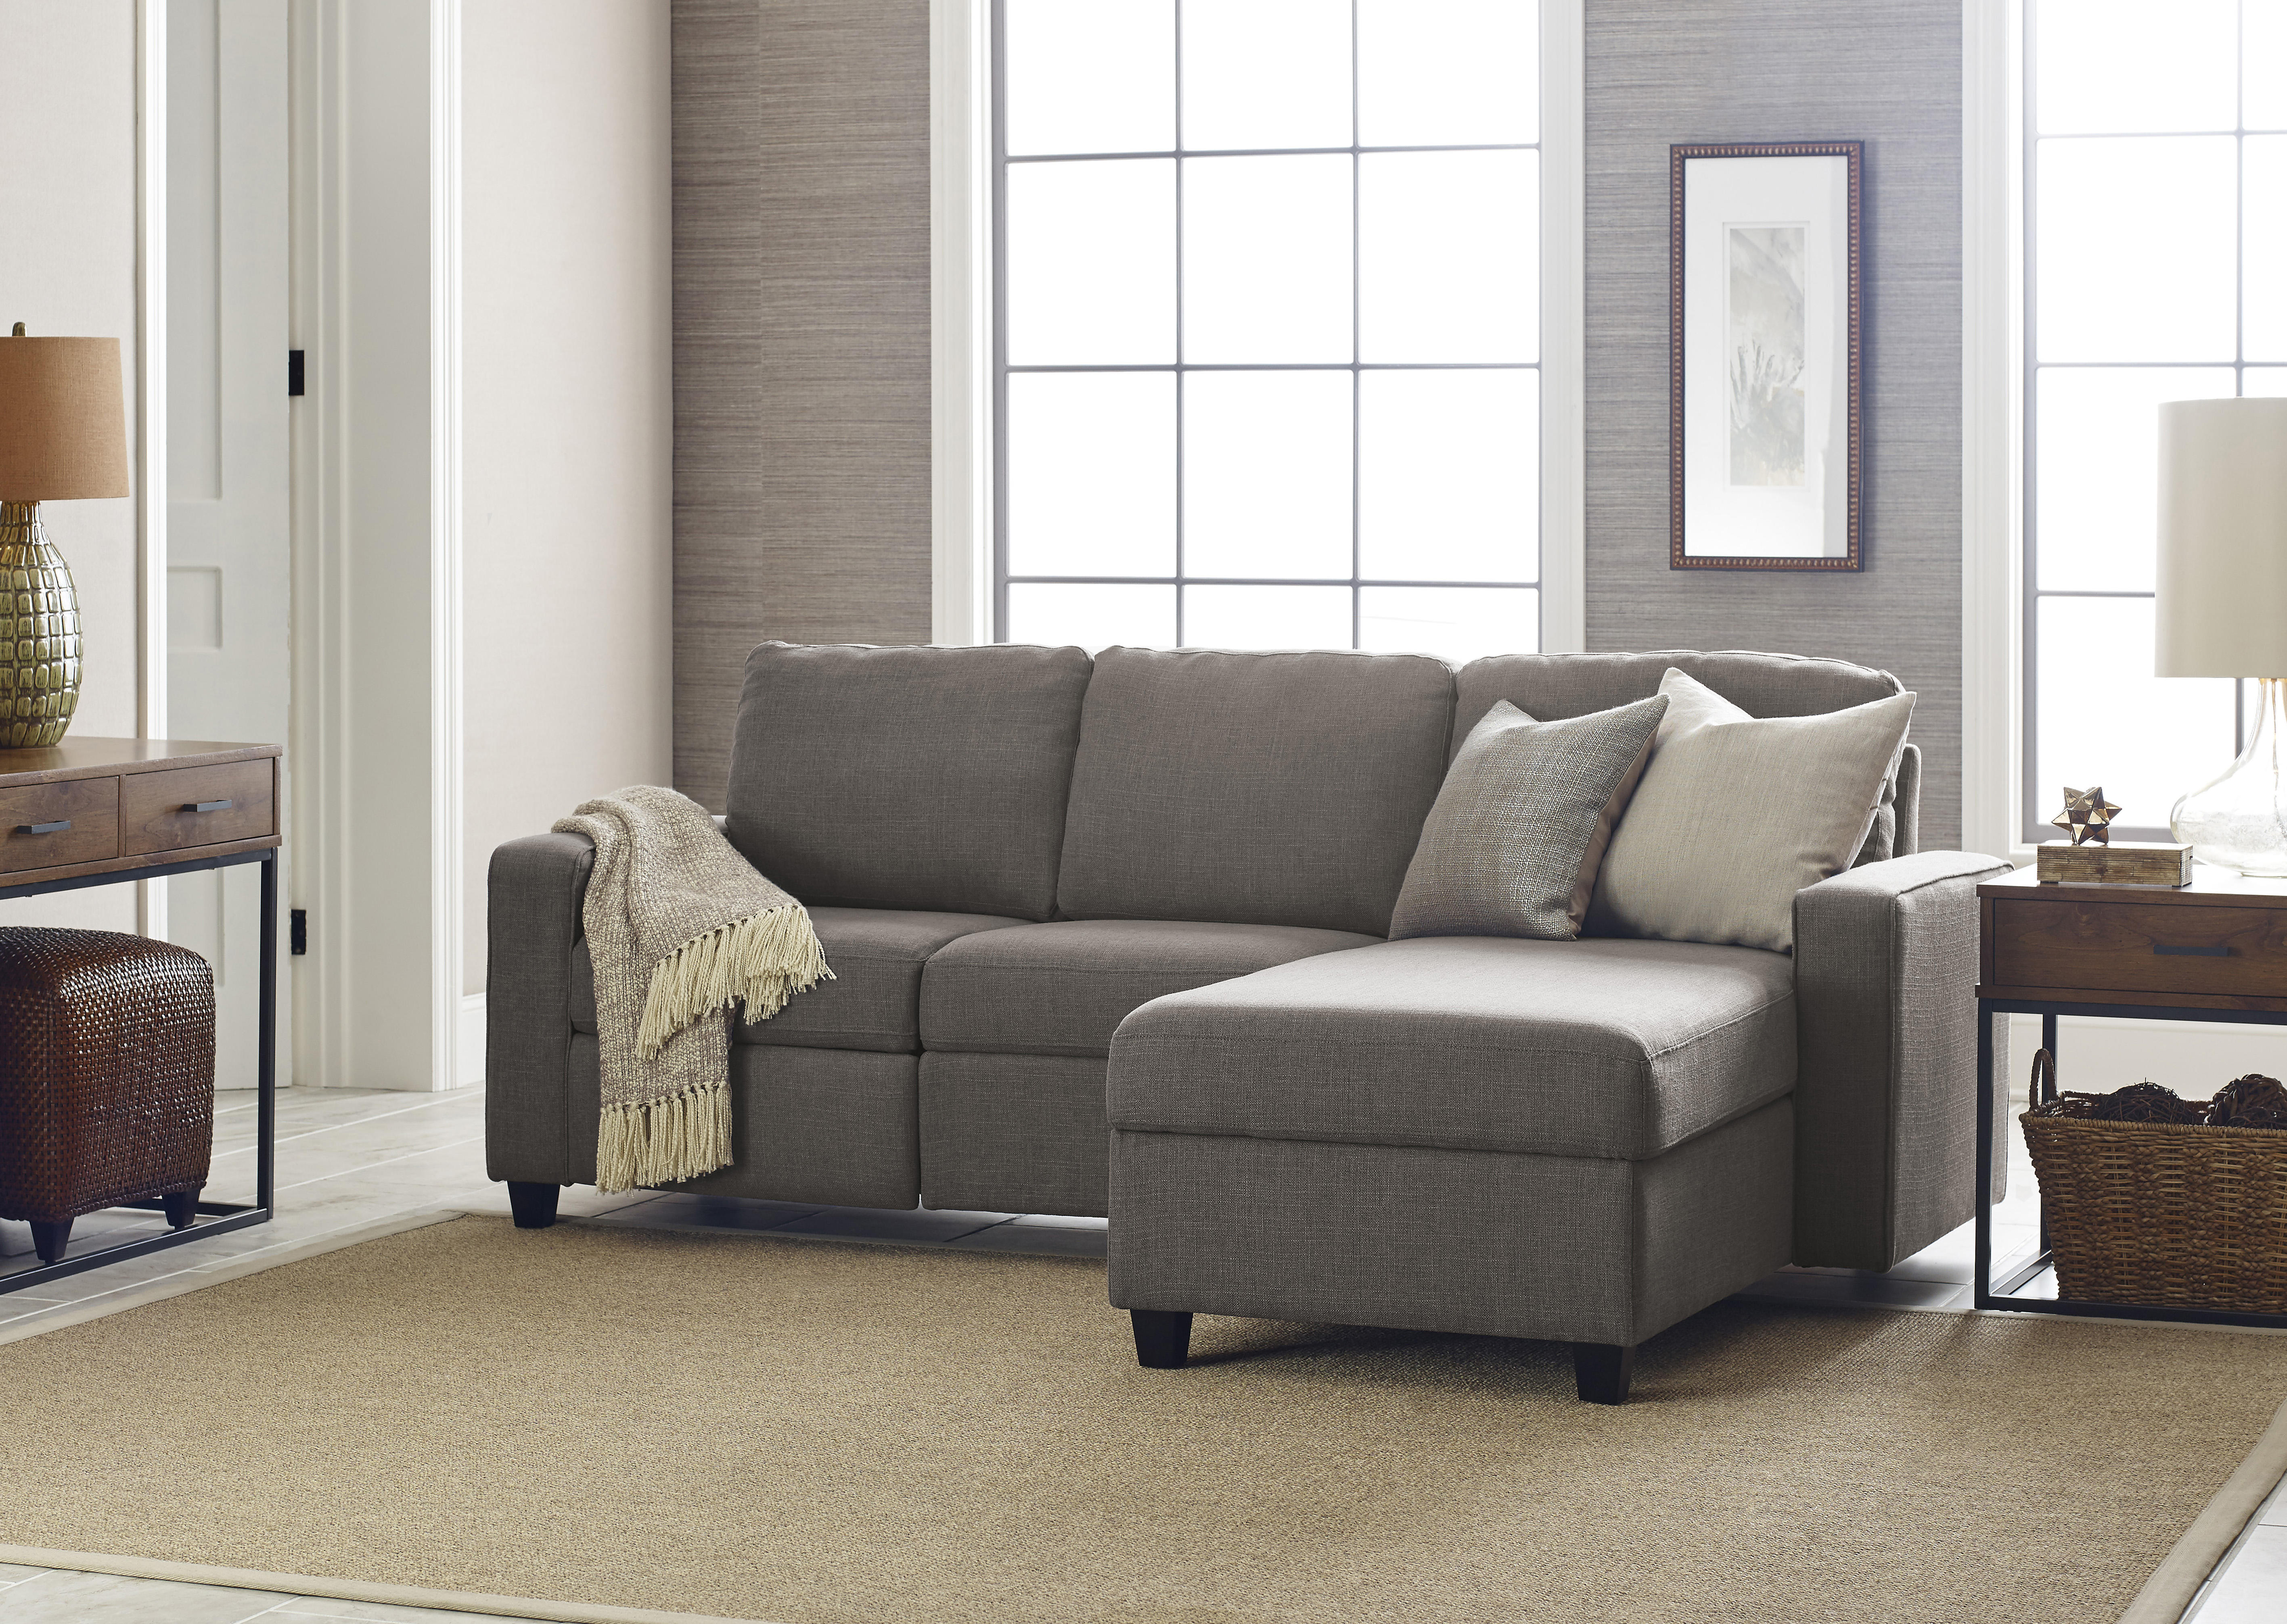 Serta Palisades Reclining Sectional with Right Storage Chaise - Gray - image 4 of 9